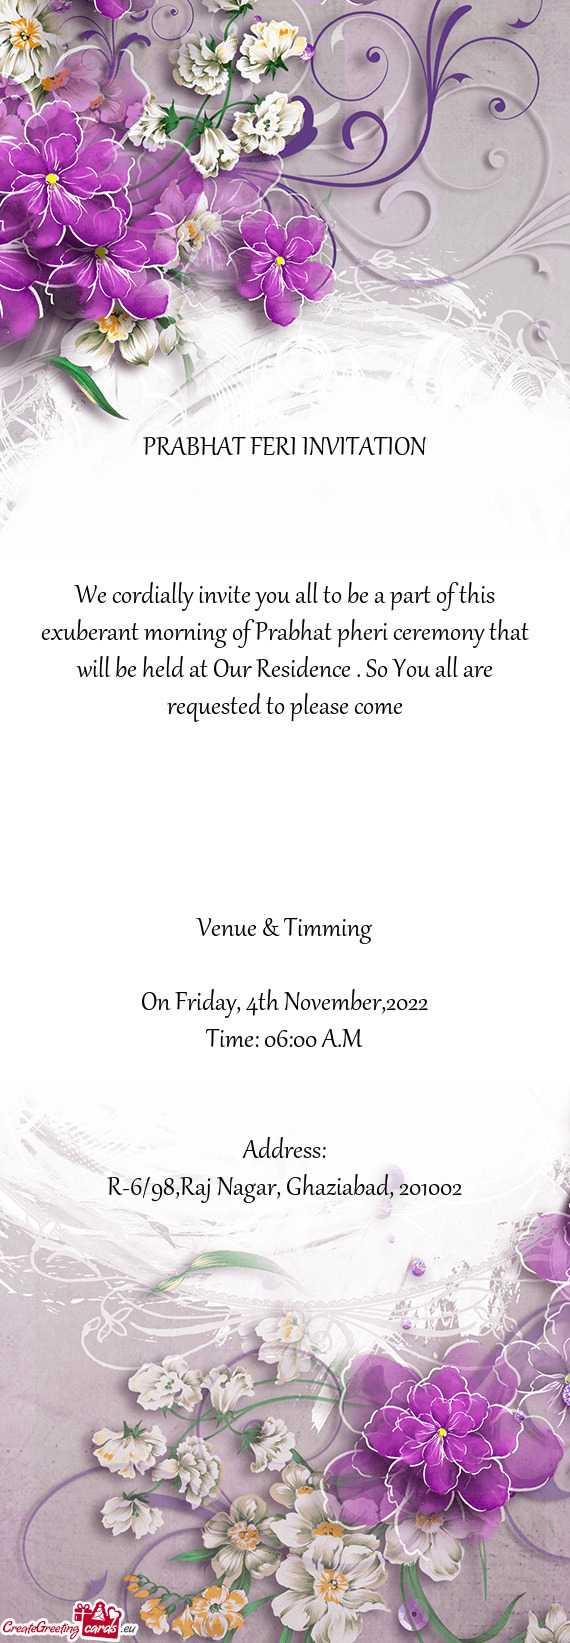 We cordially invite you all to be a part of this exuberant morning of Prabhat pheri ceremony that wi